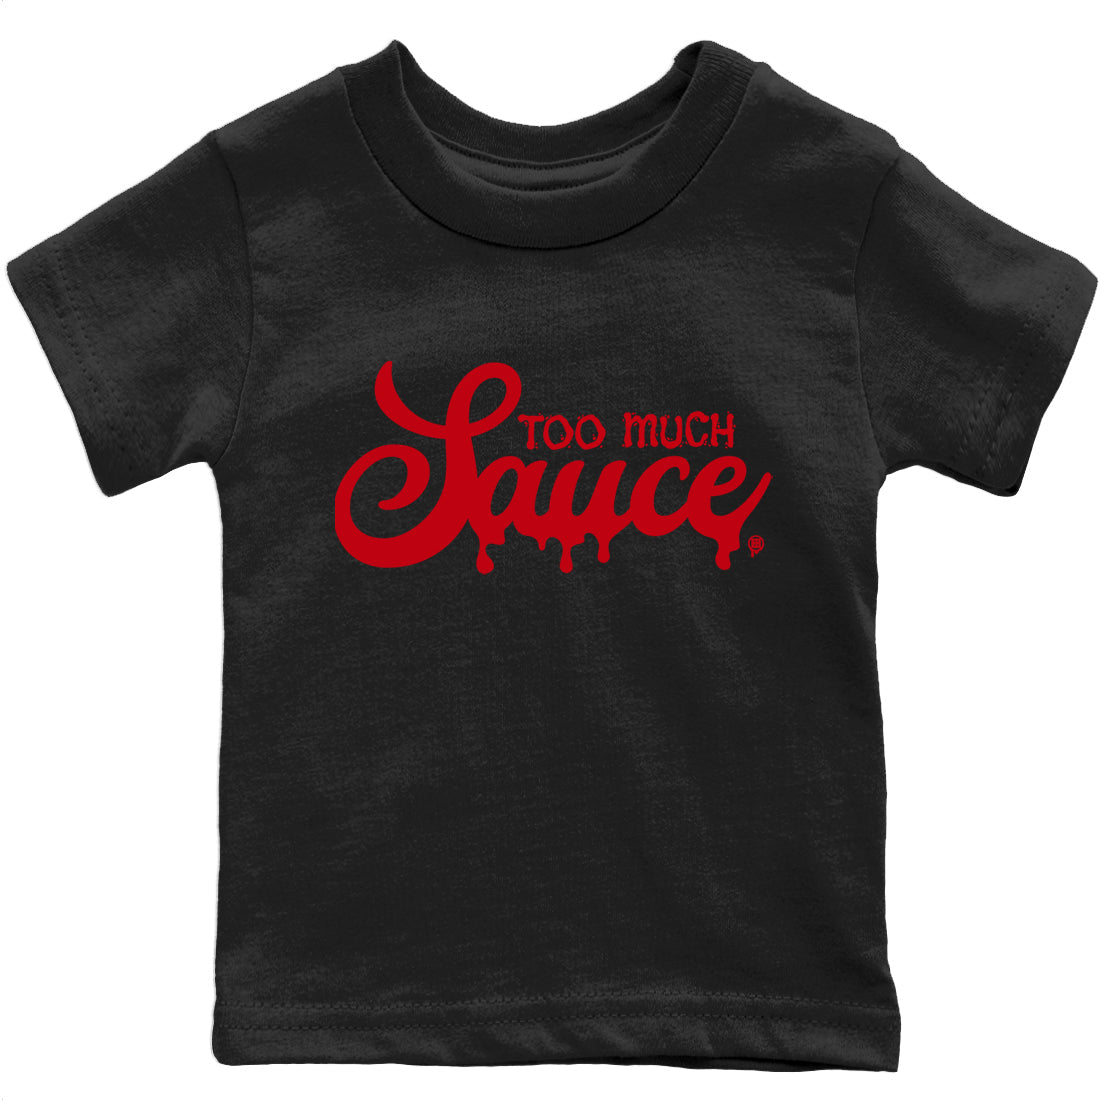 Jordan 9 Chile Red Sneaker Match Tees Too Much Sauce Sneaker Tees Jordan 9 Chile Red Sneaker Release Tees Kids Shirts